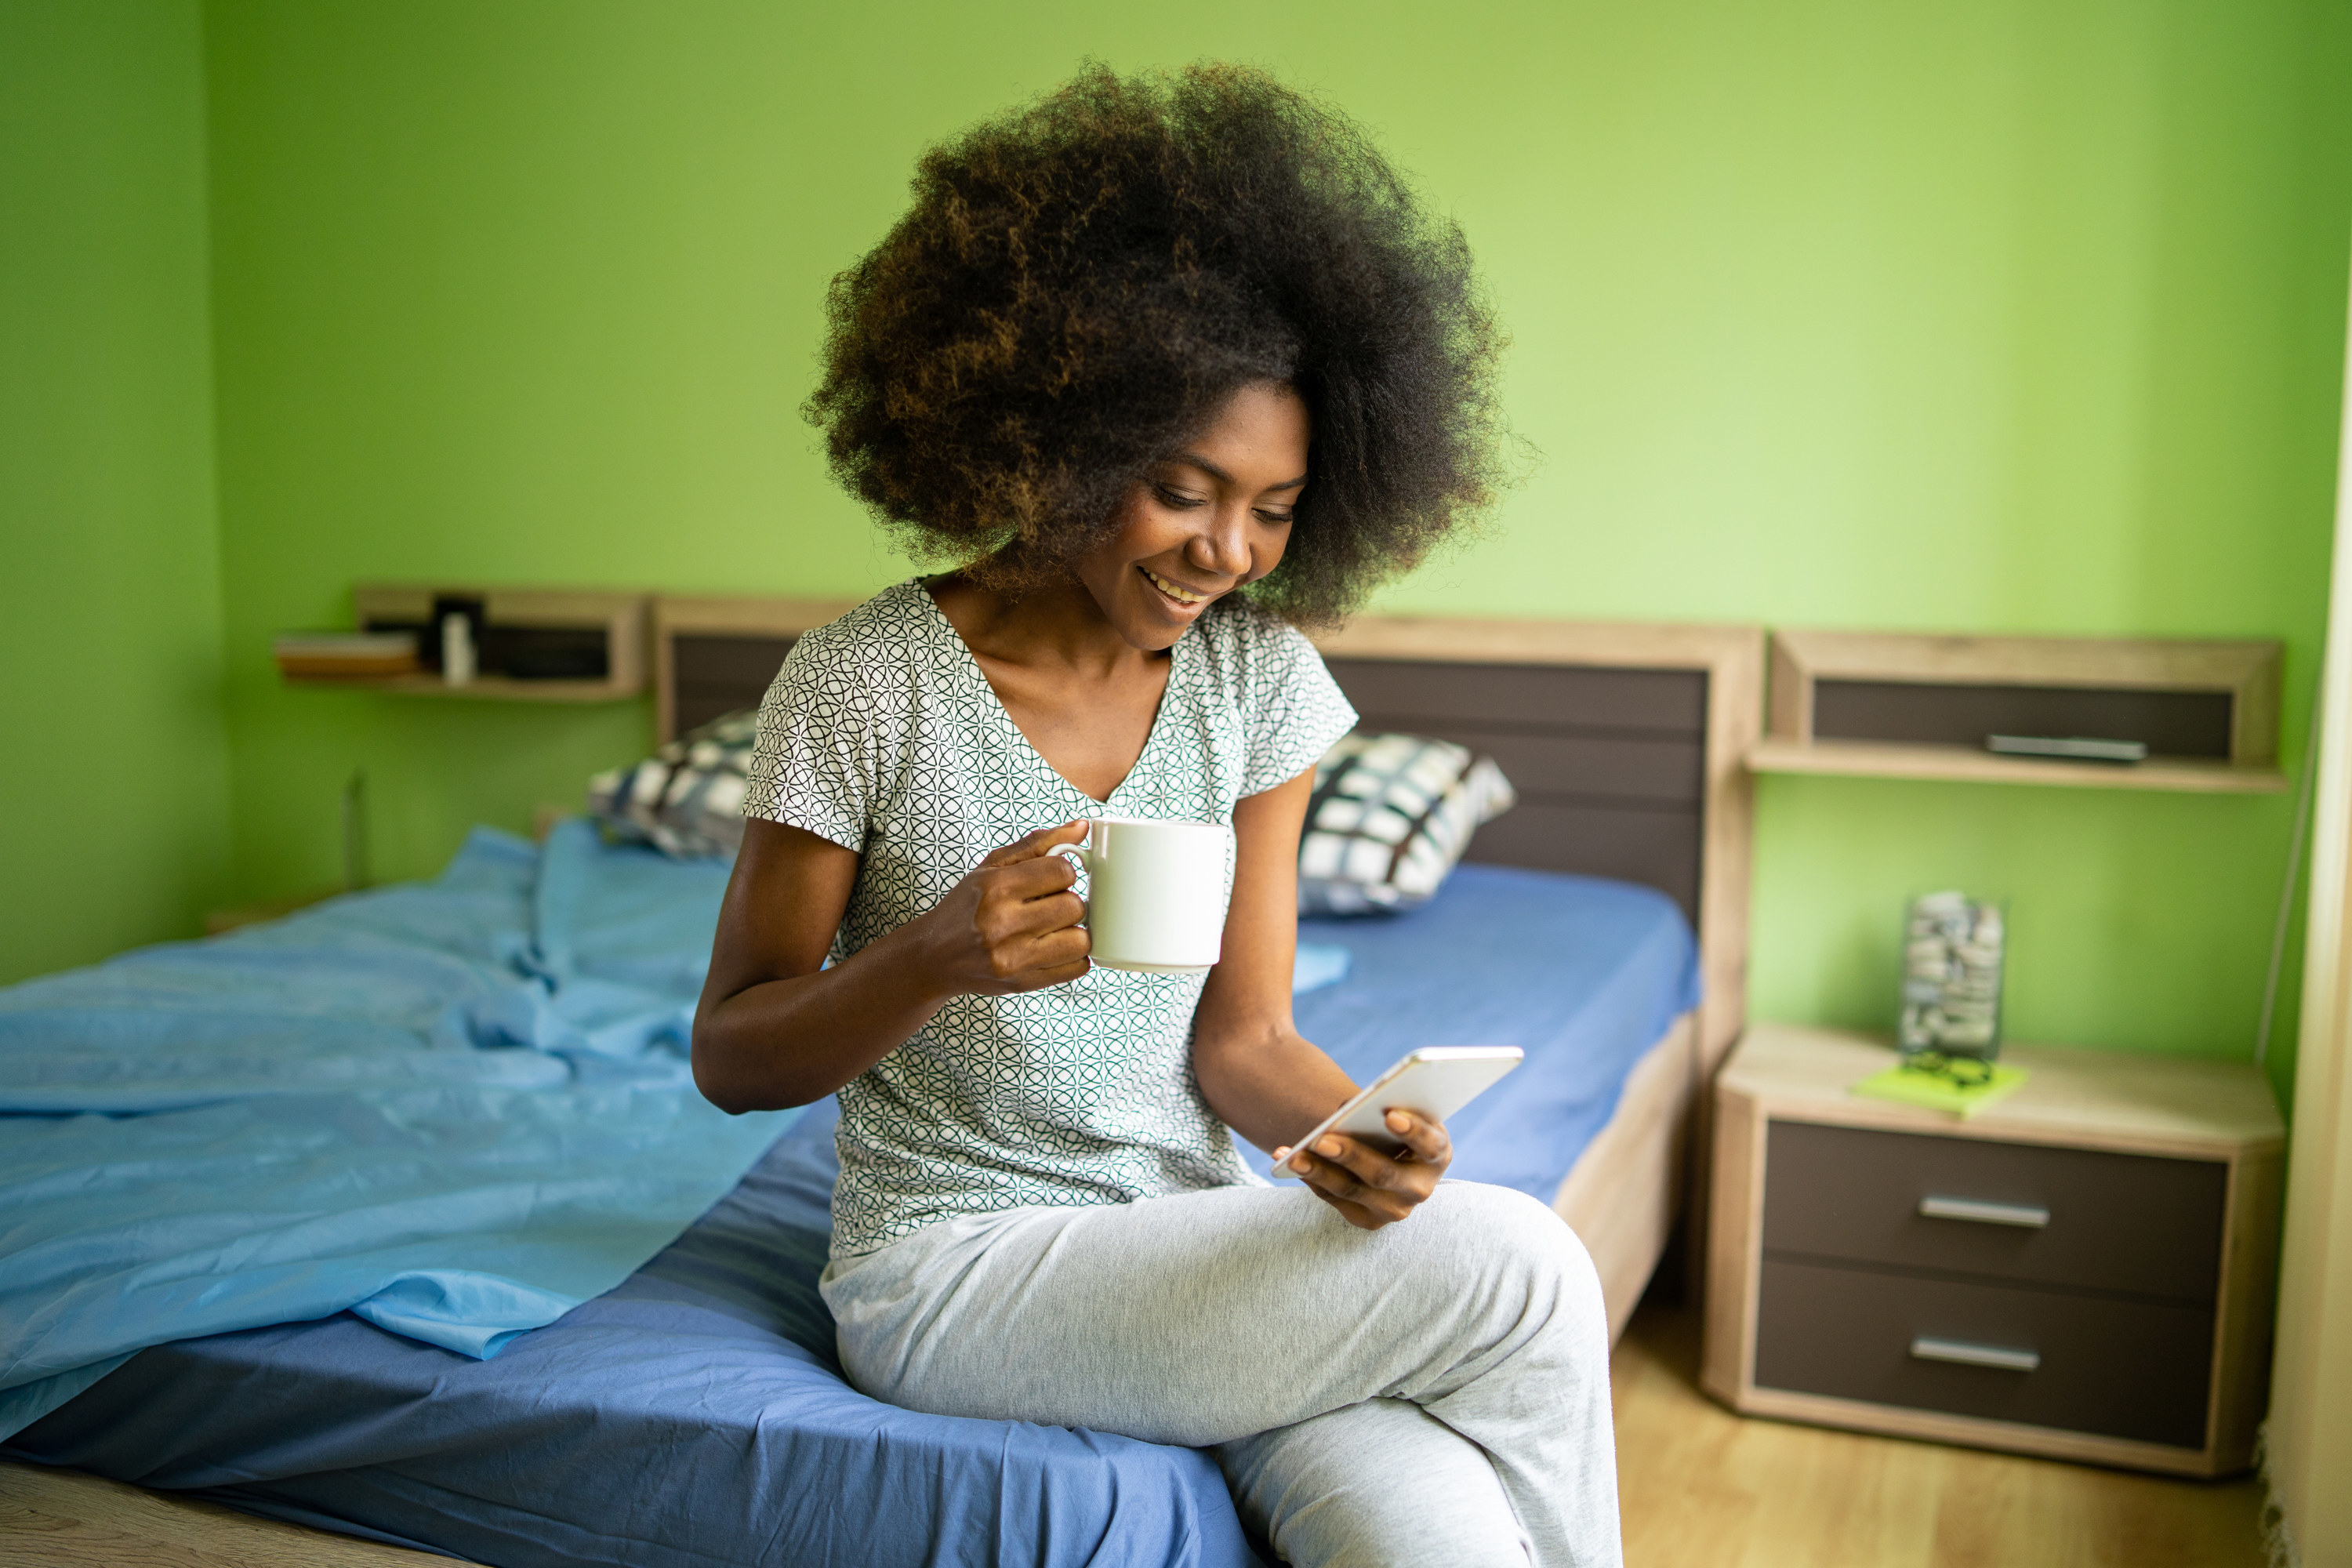 A woman sitting on her bed smiles at her phone while learning from a language app